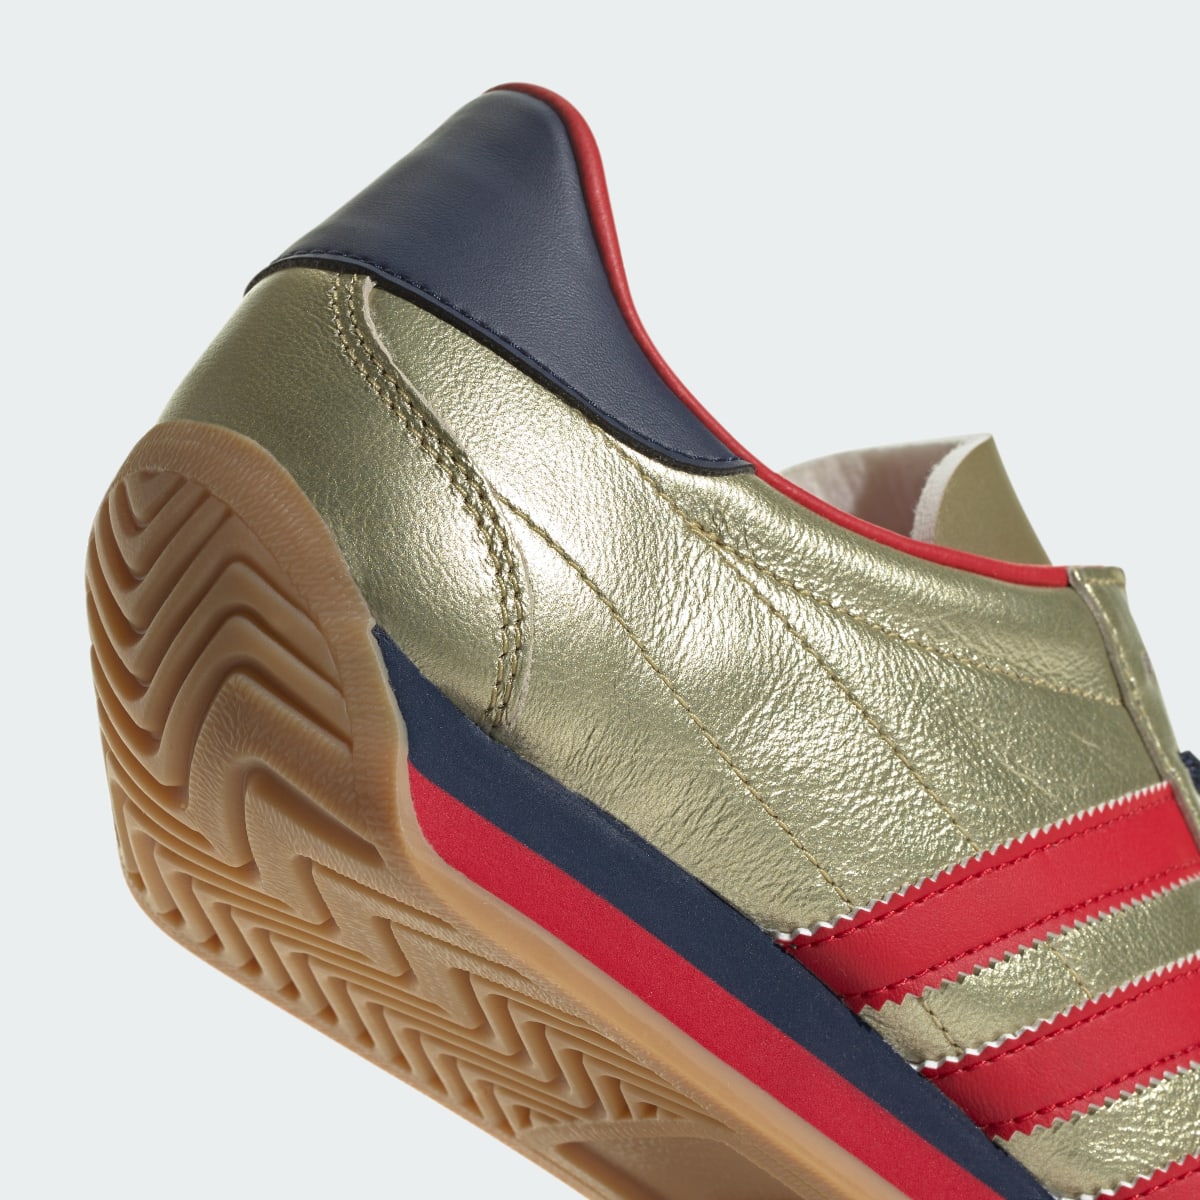 Adidas Country OG Shoes. 10